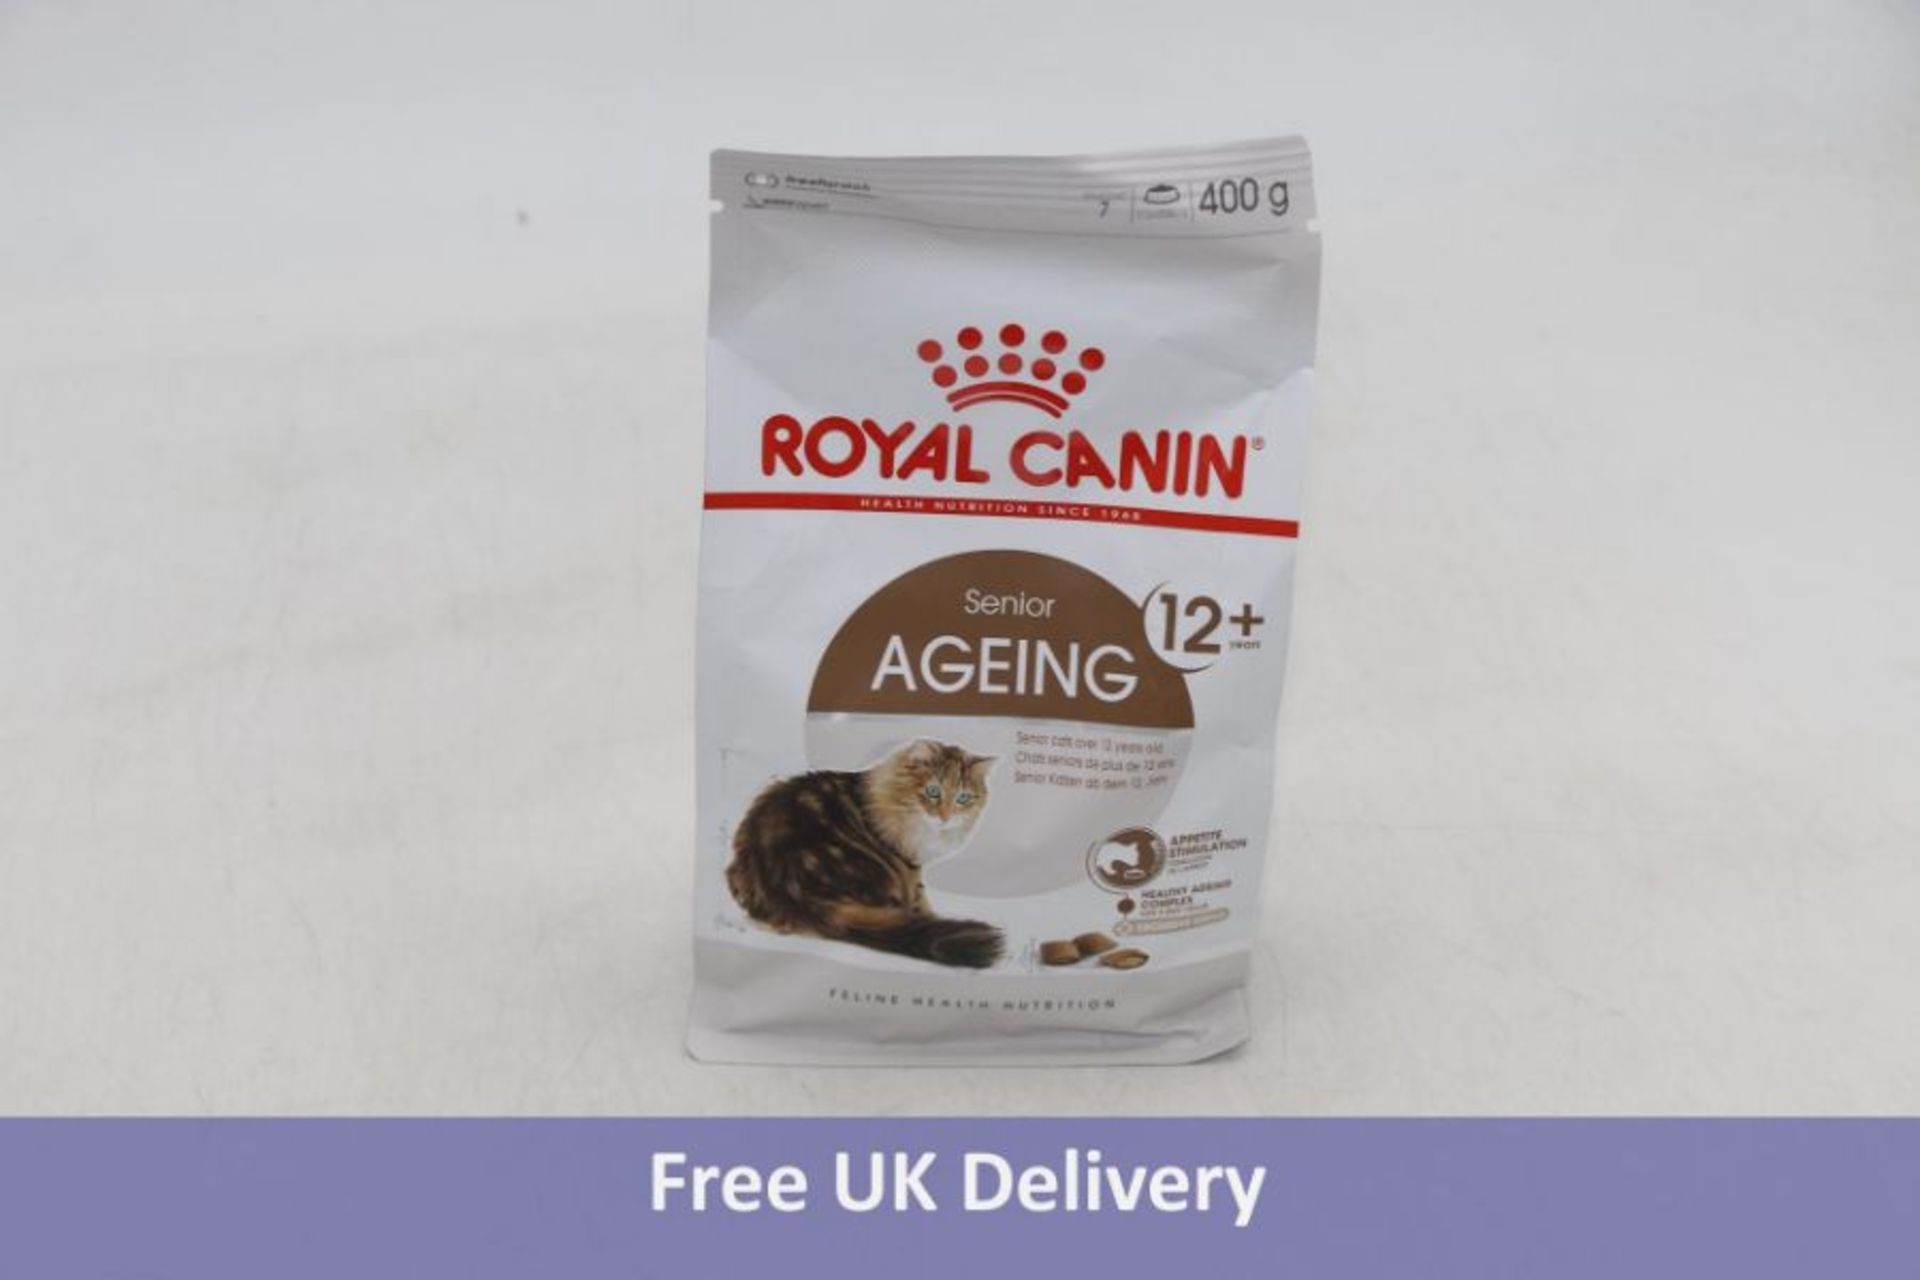 Eight Royal Canin Senior Ageing 12+ Adult Dry Cat Food, 400g, Expiry Date 12/7/2023